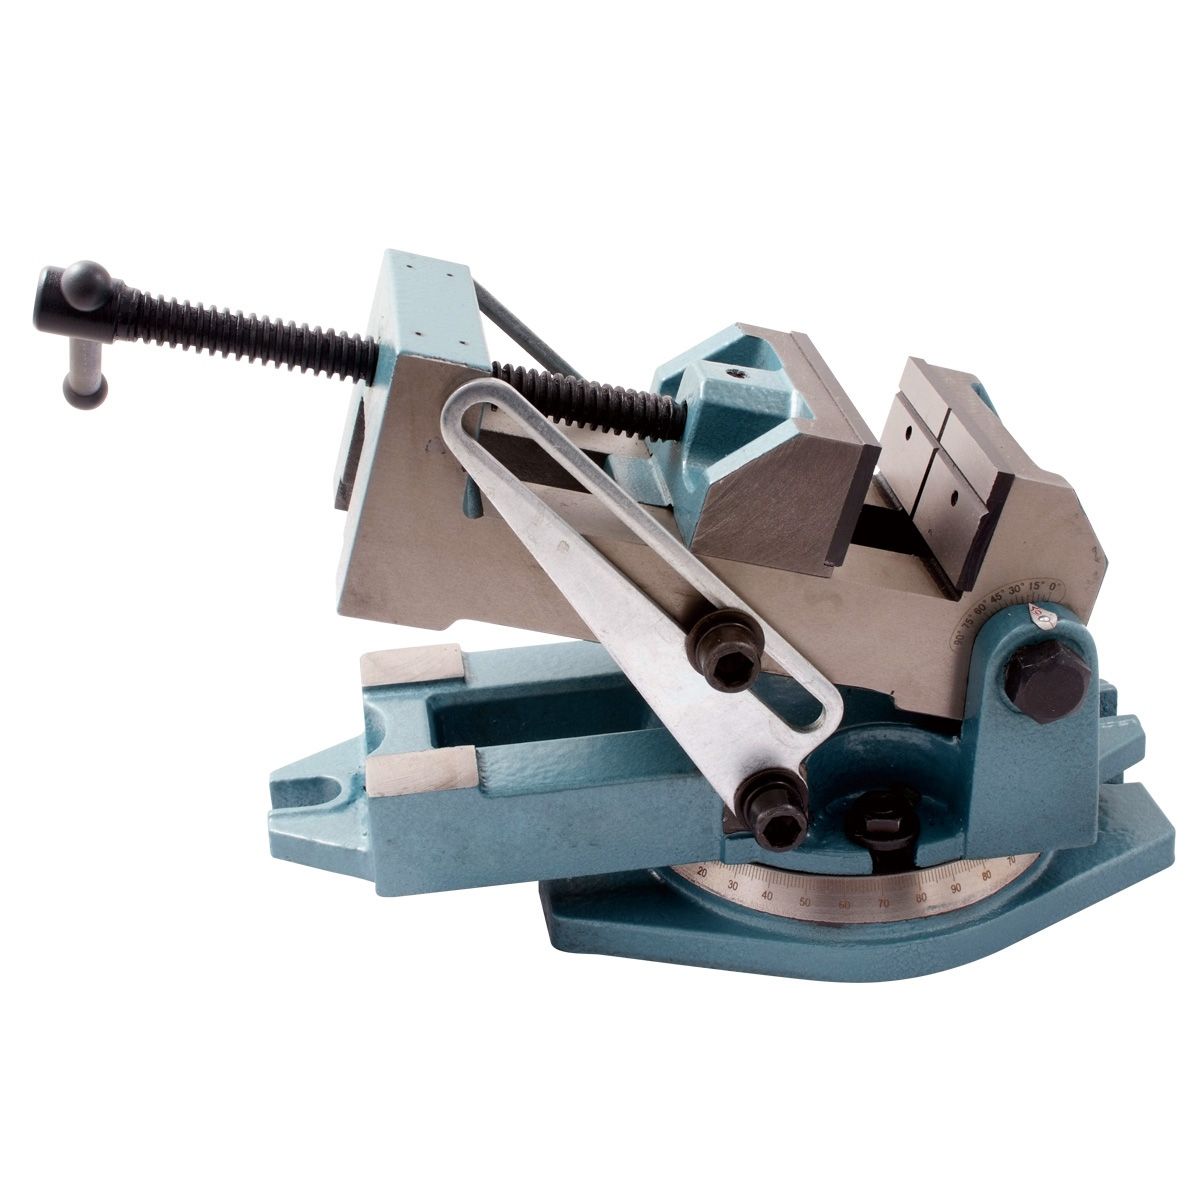 4" PRO-SERIES ANGLE DRILL PRESS VISE WITH SWIVEL BASE (3901-1735)